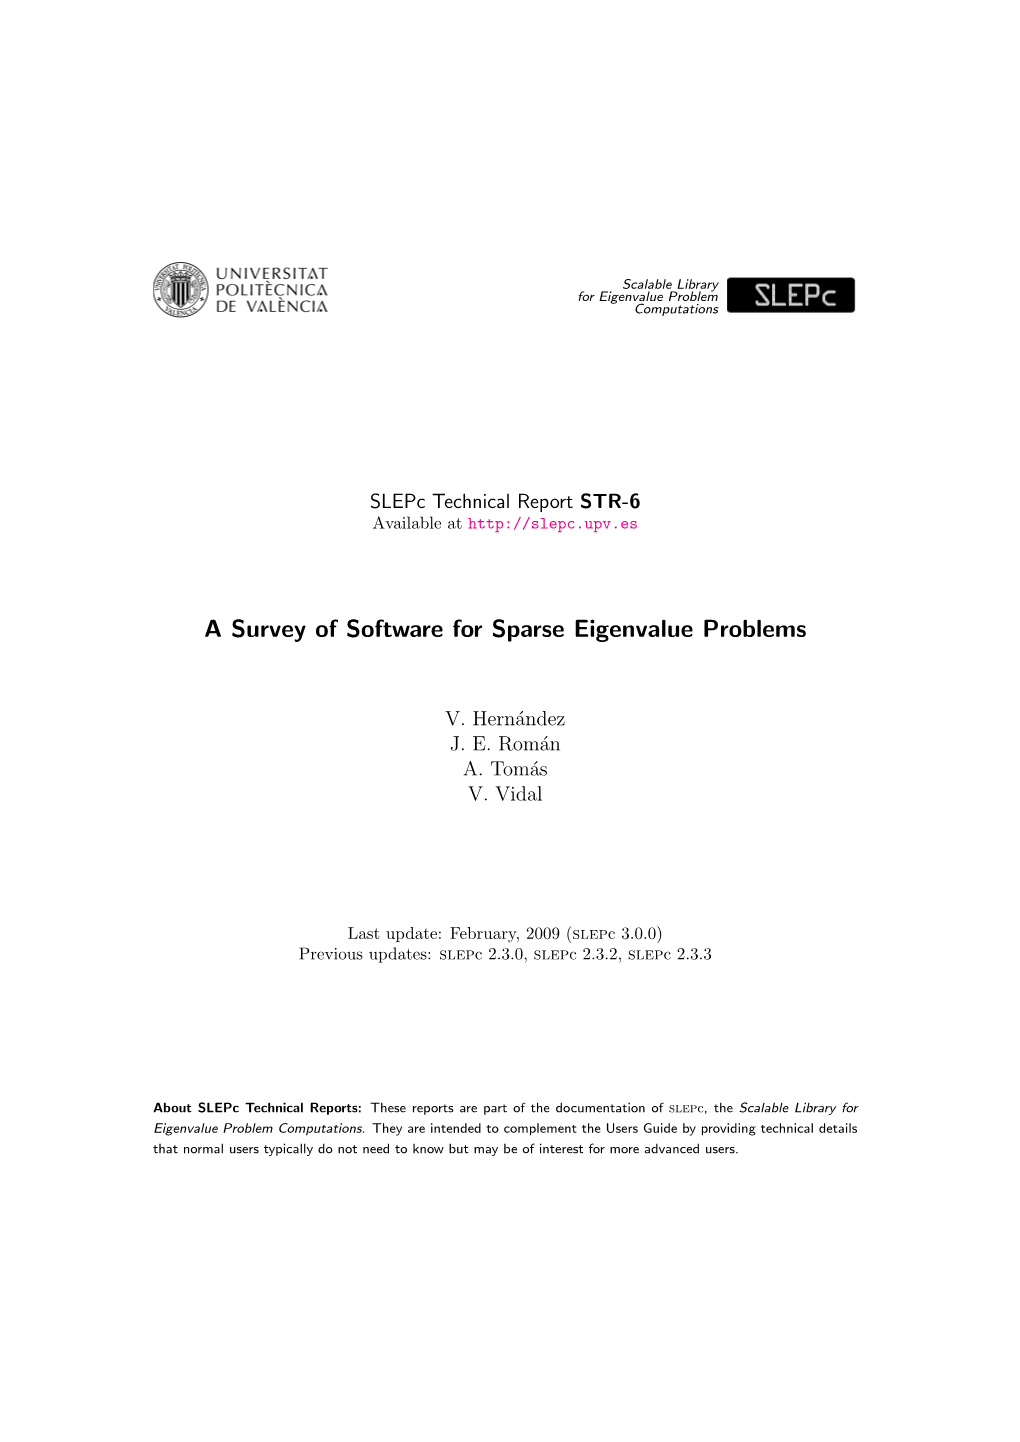 A Survey of Software for Sparse Eigenvalue Problems